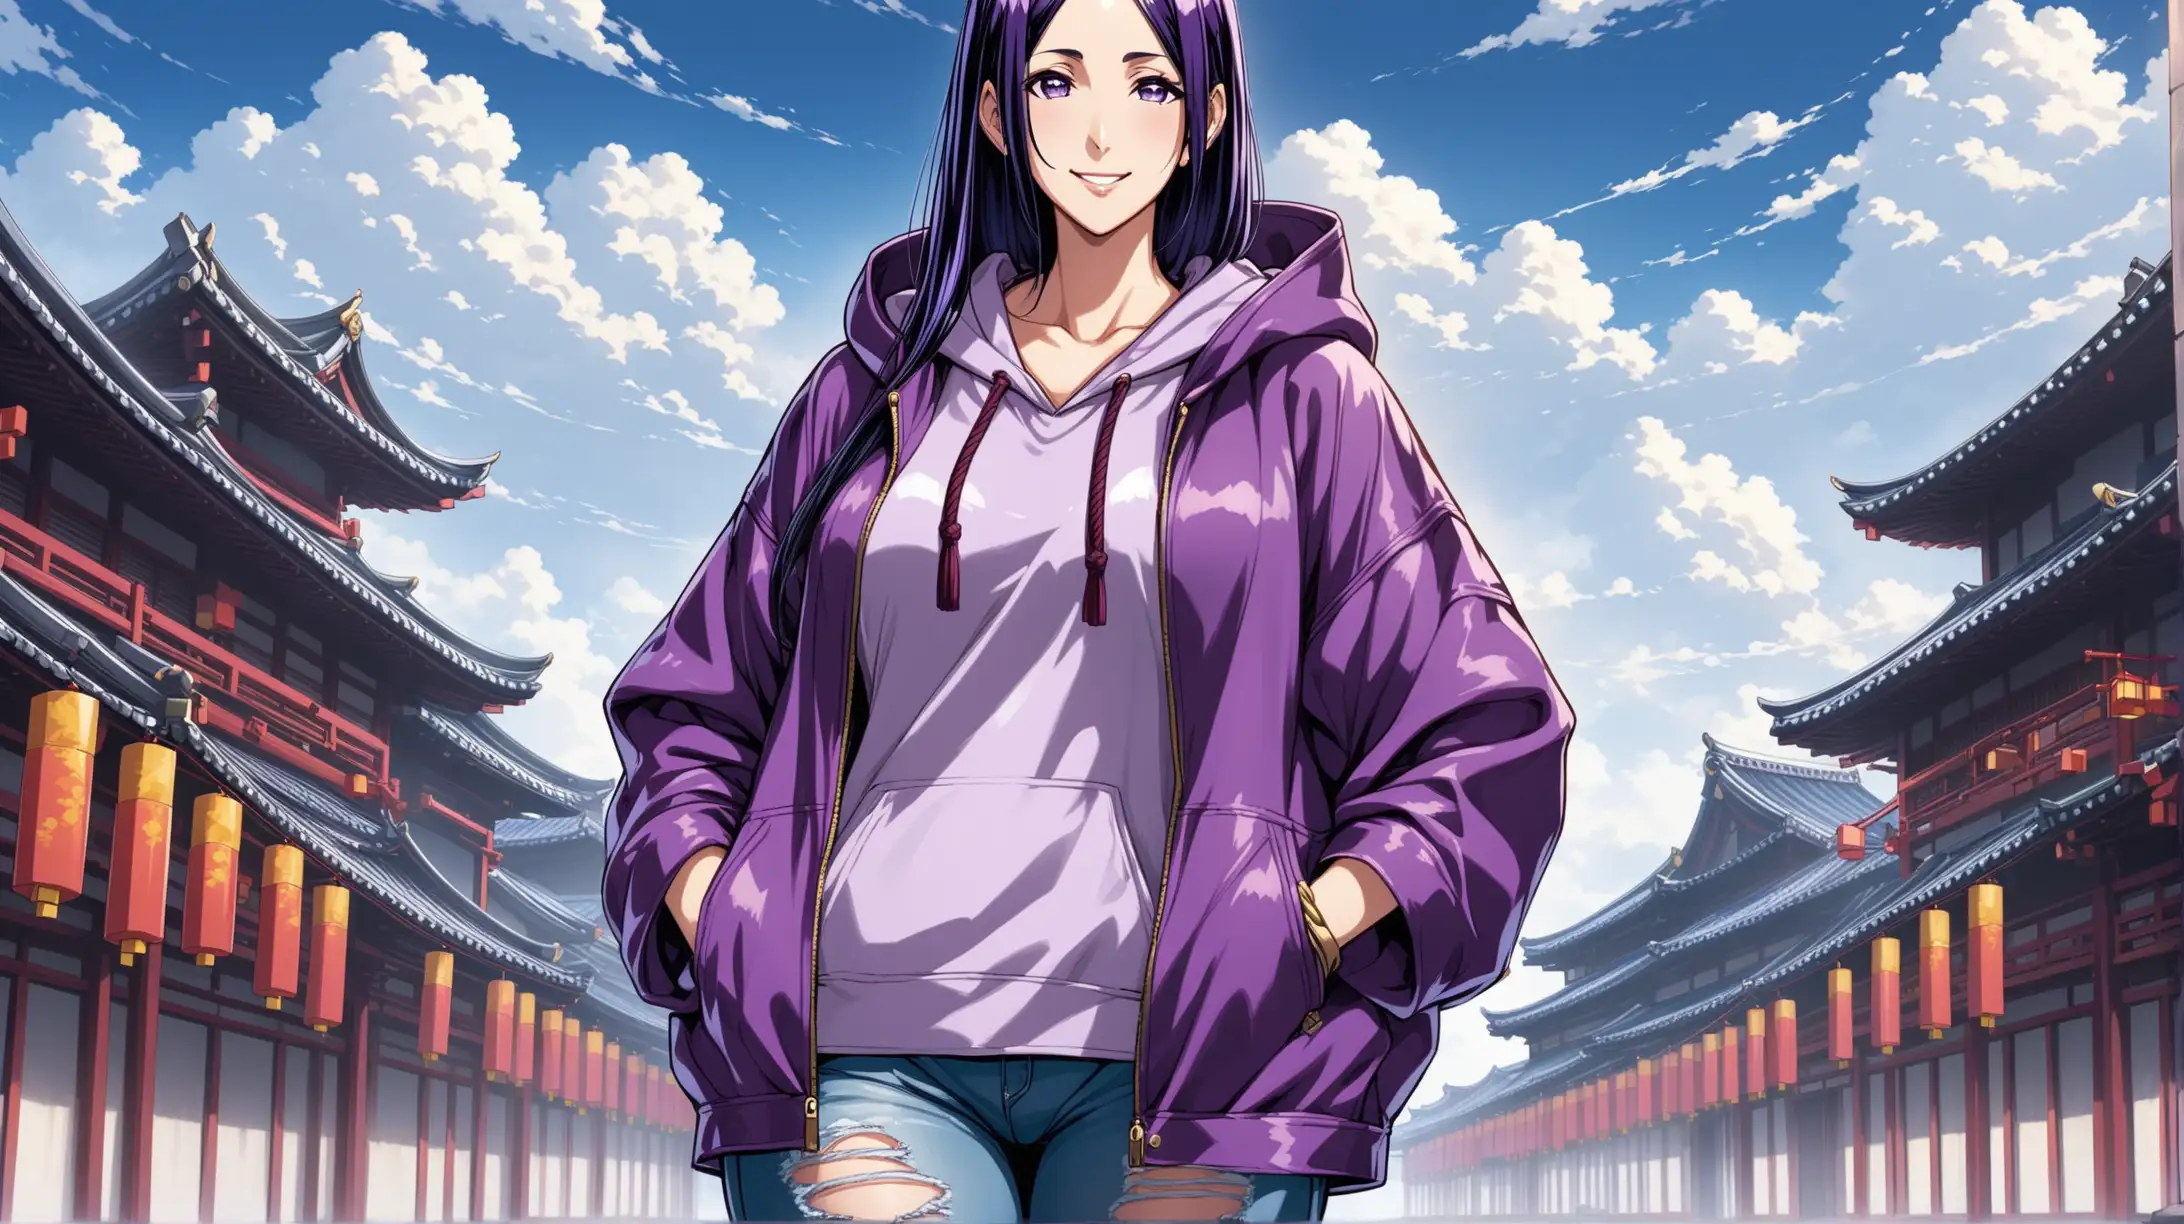 Draw the character Minamoto no Raikou standing alone outside on a cloudy day while she is wearing ripped jeans and a hooded jacket and smiling at the viewer